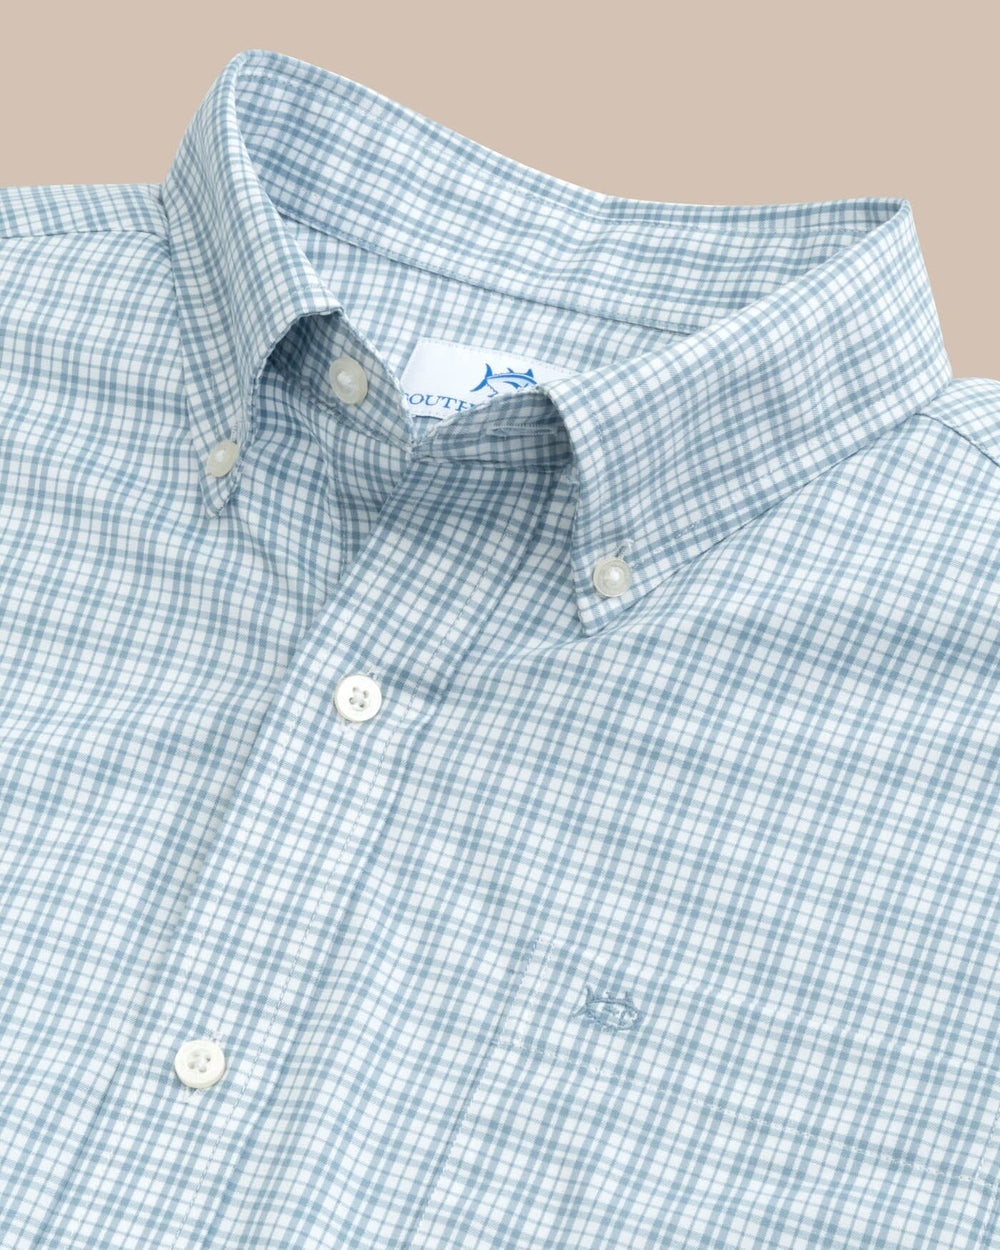 The detail view of the Southern Tide brrr Intercoastal Poinsett Plaid Long Sleeve Sportshirt by Southern Tide - Windward Blue